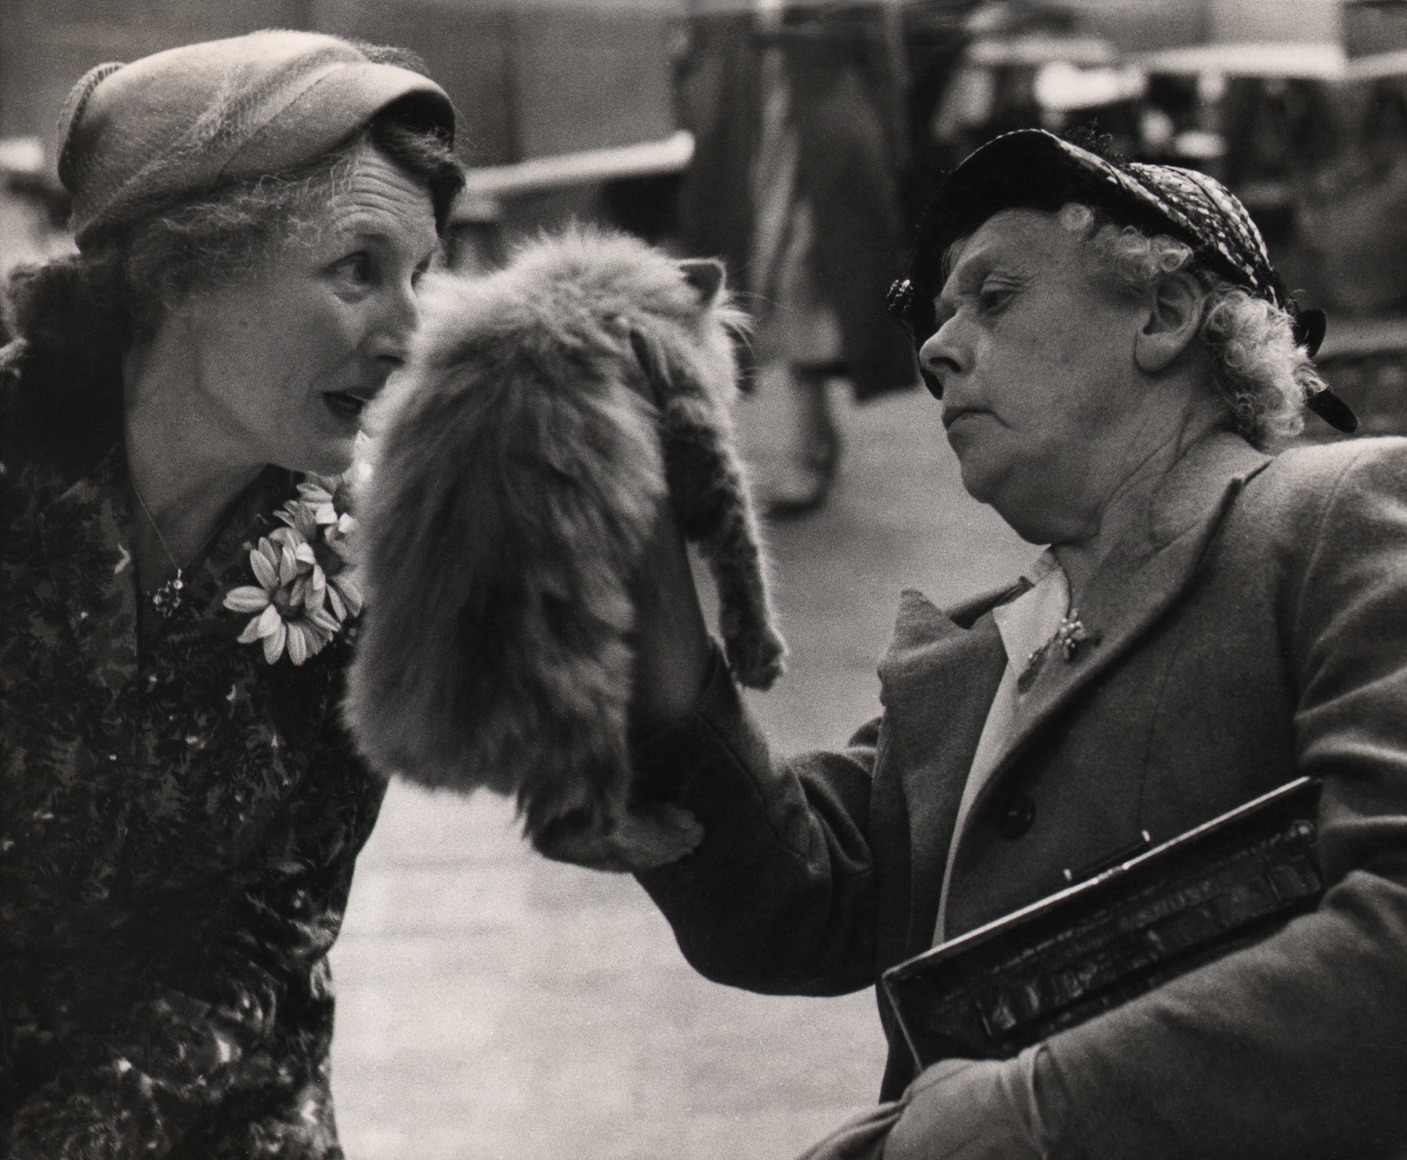 22. Grace Robertson, Cat Fanciers, ​c. 1956. Two middle-aged people examining a cat, which is held up in front of the figure on the right using their right hand.